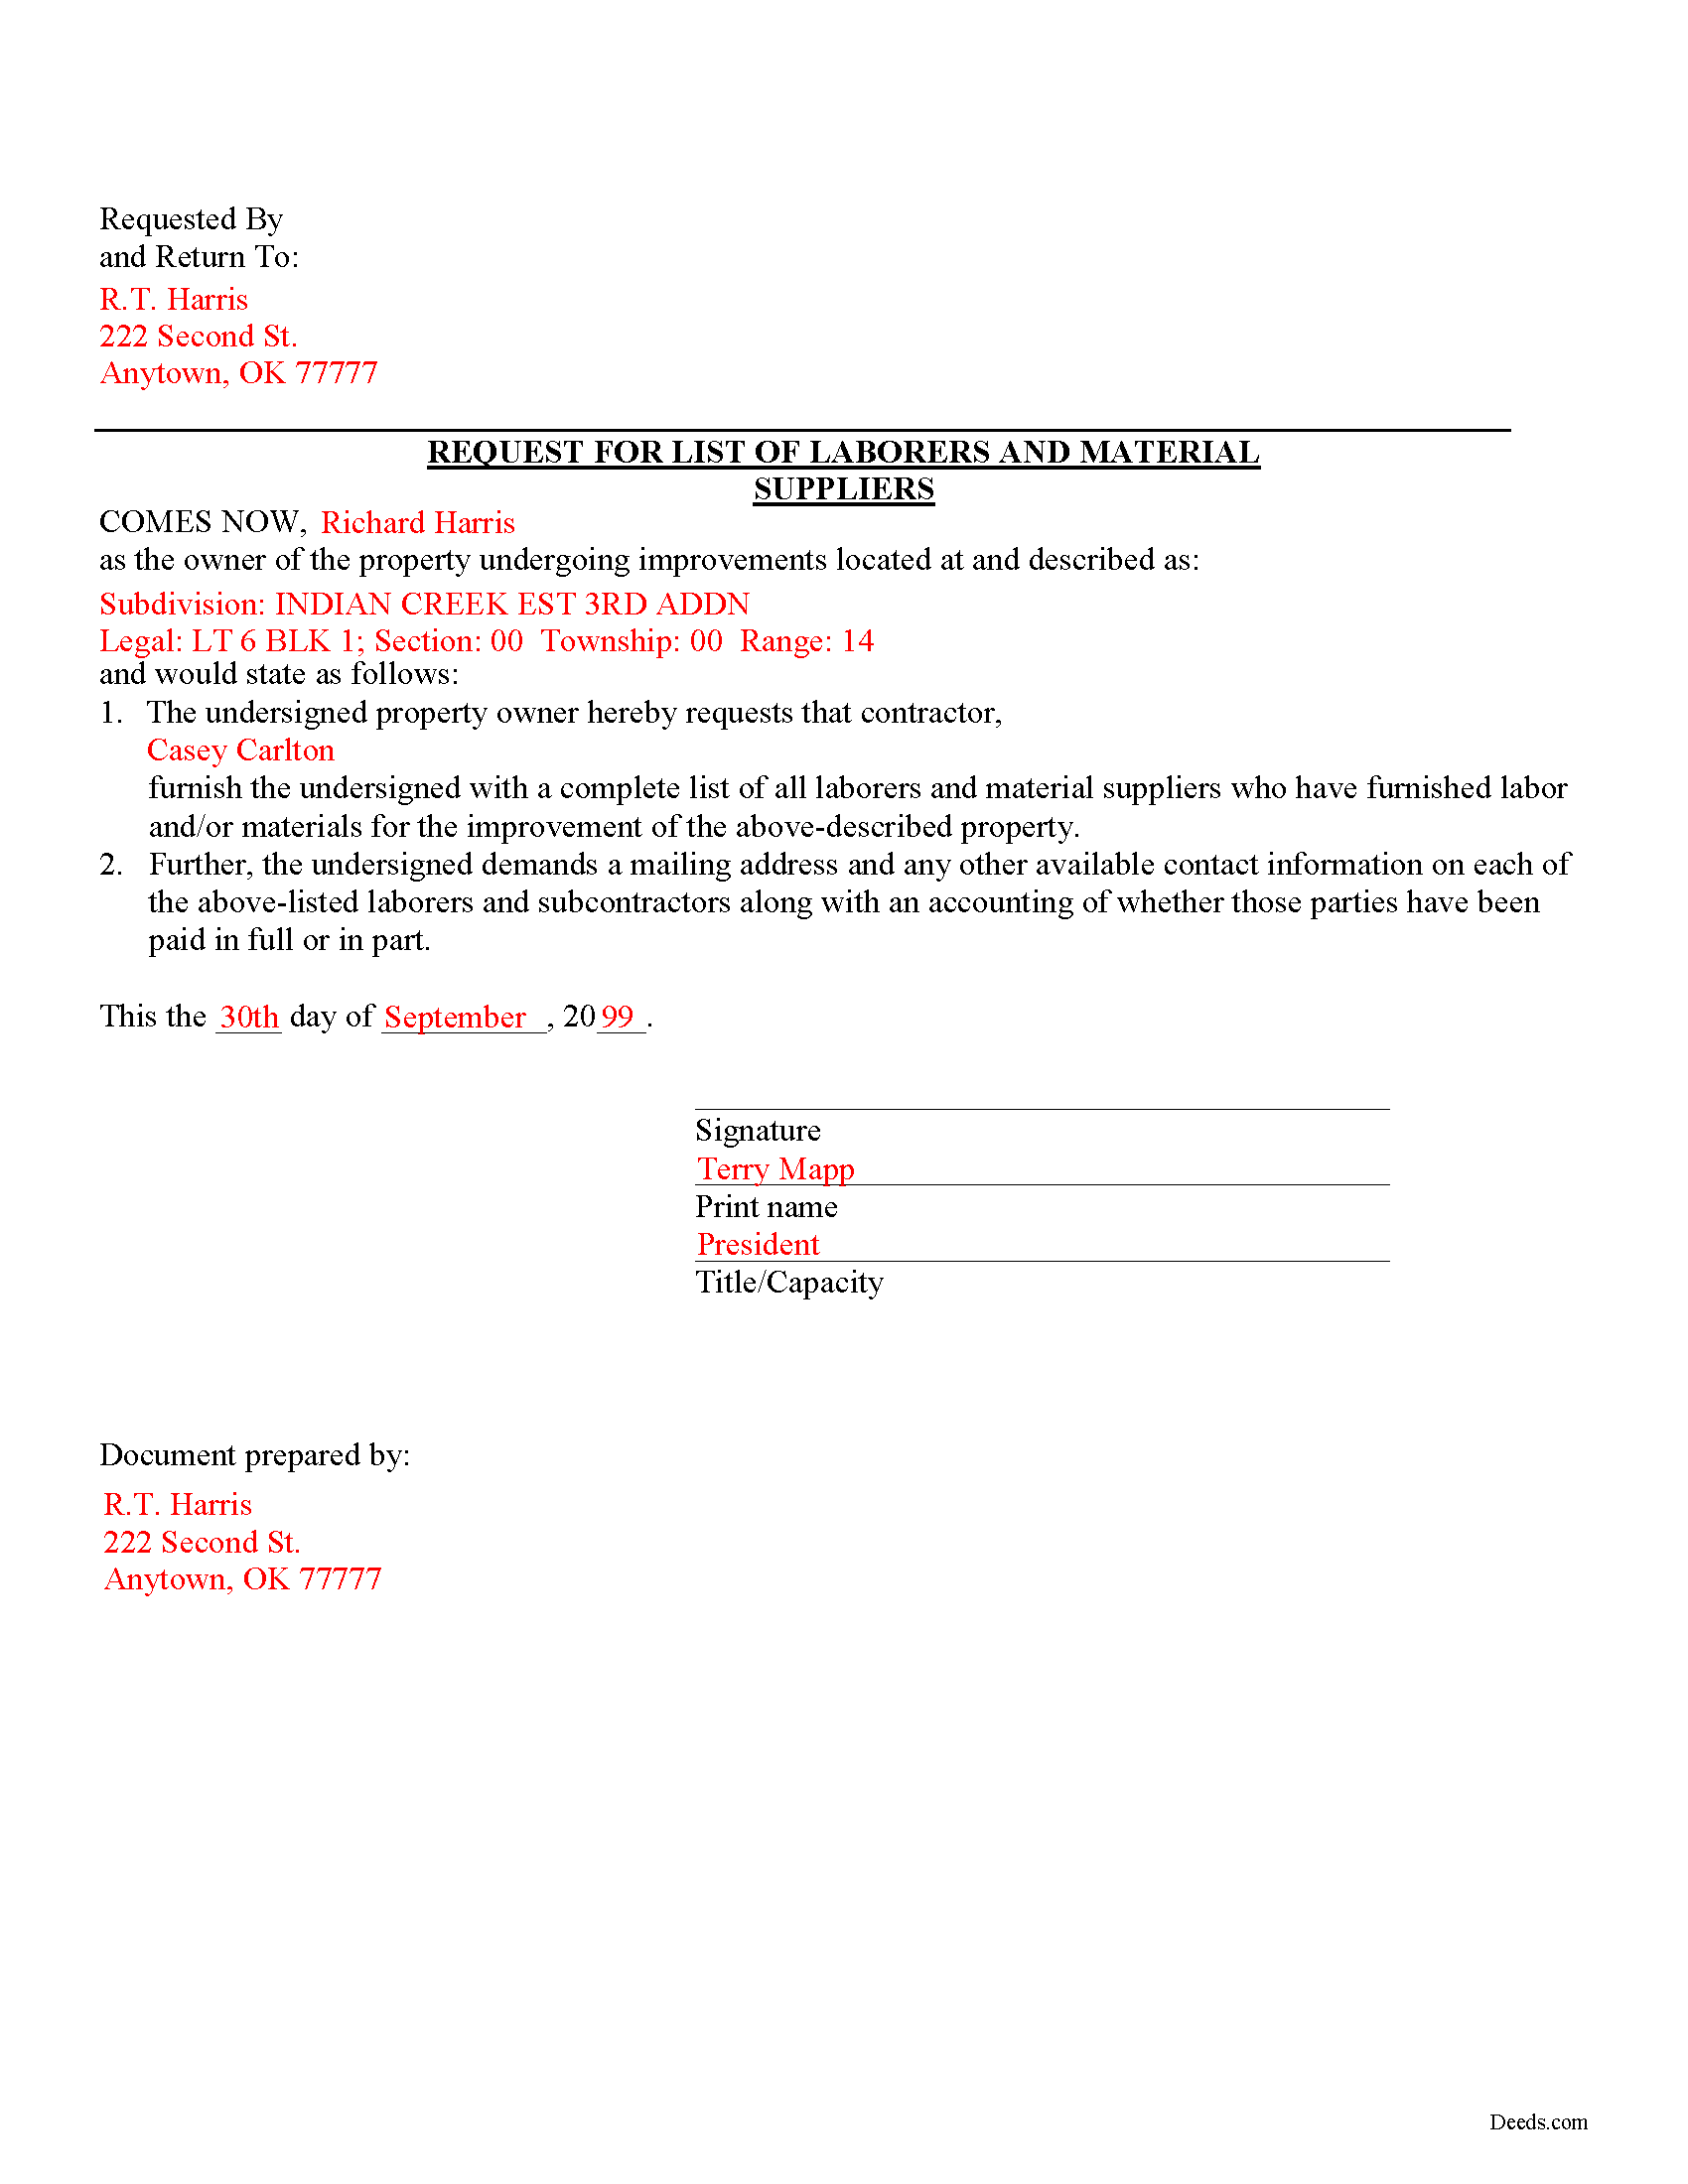 Completed Example of the Request for List Document